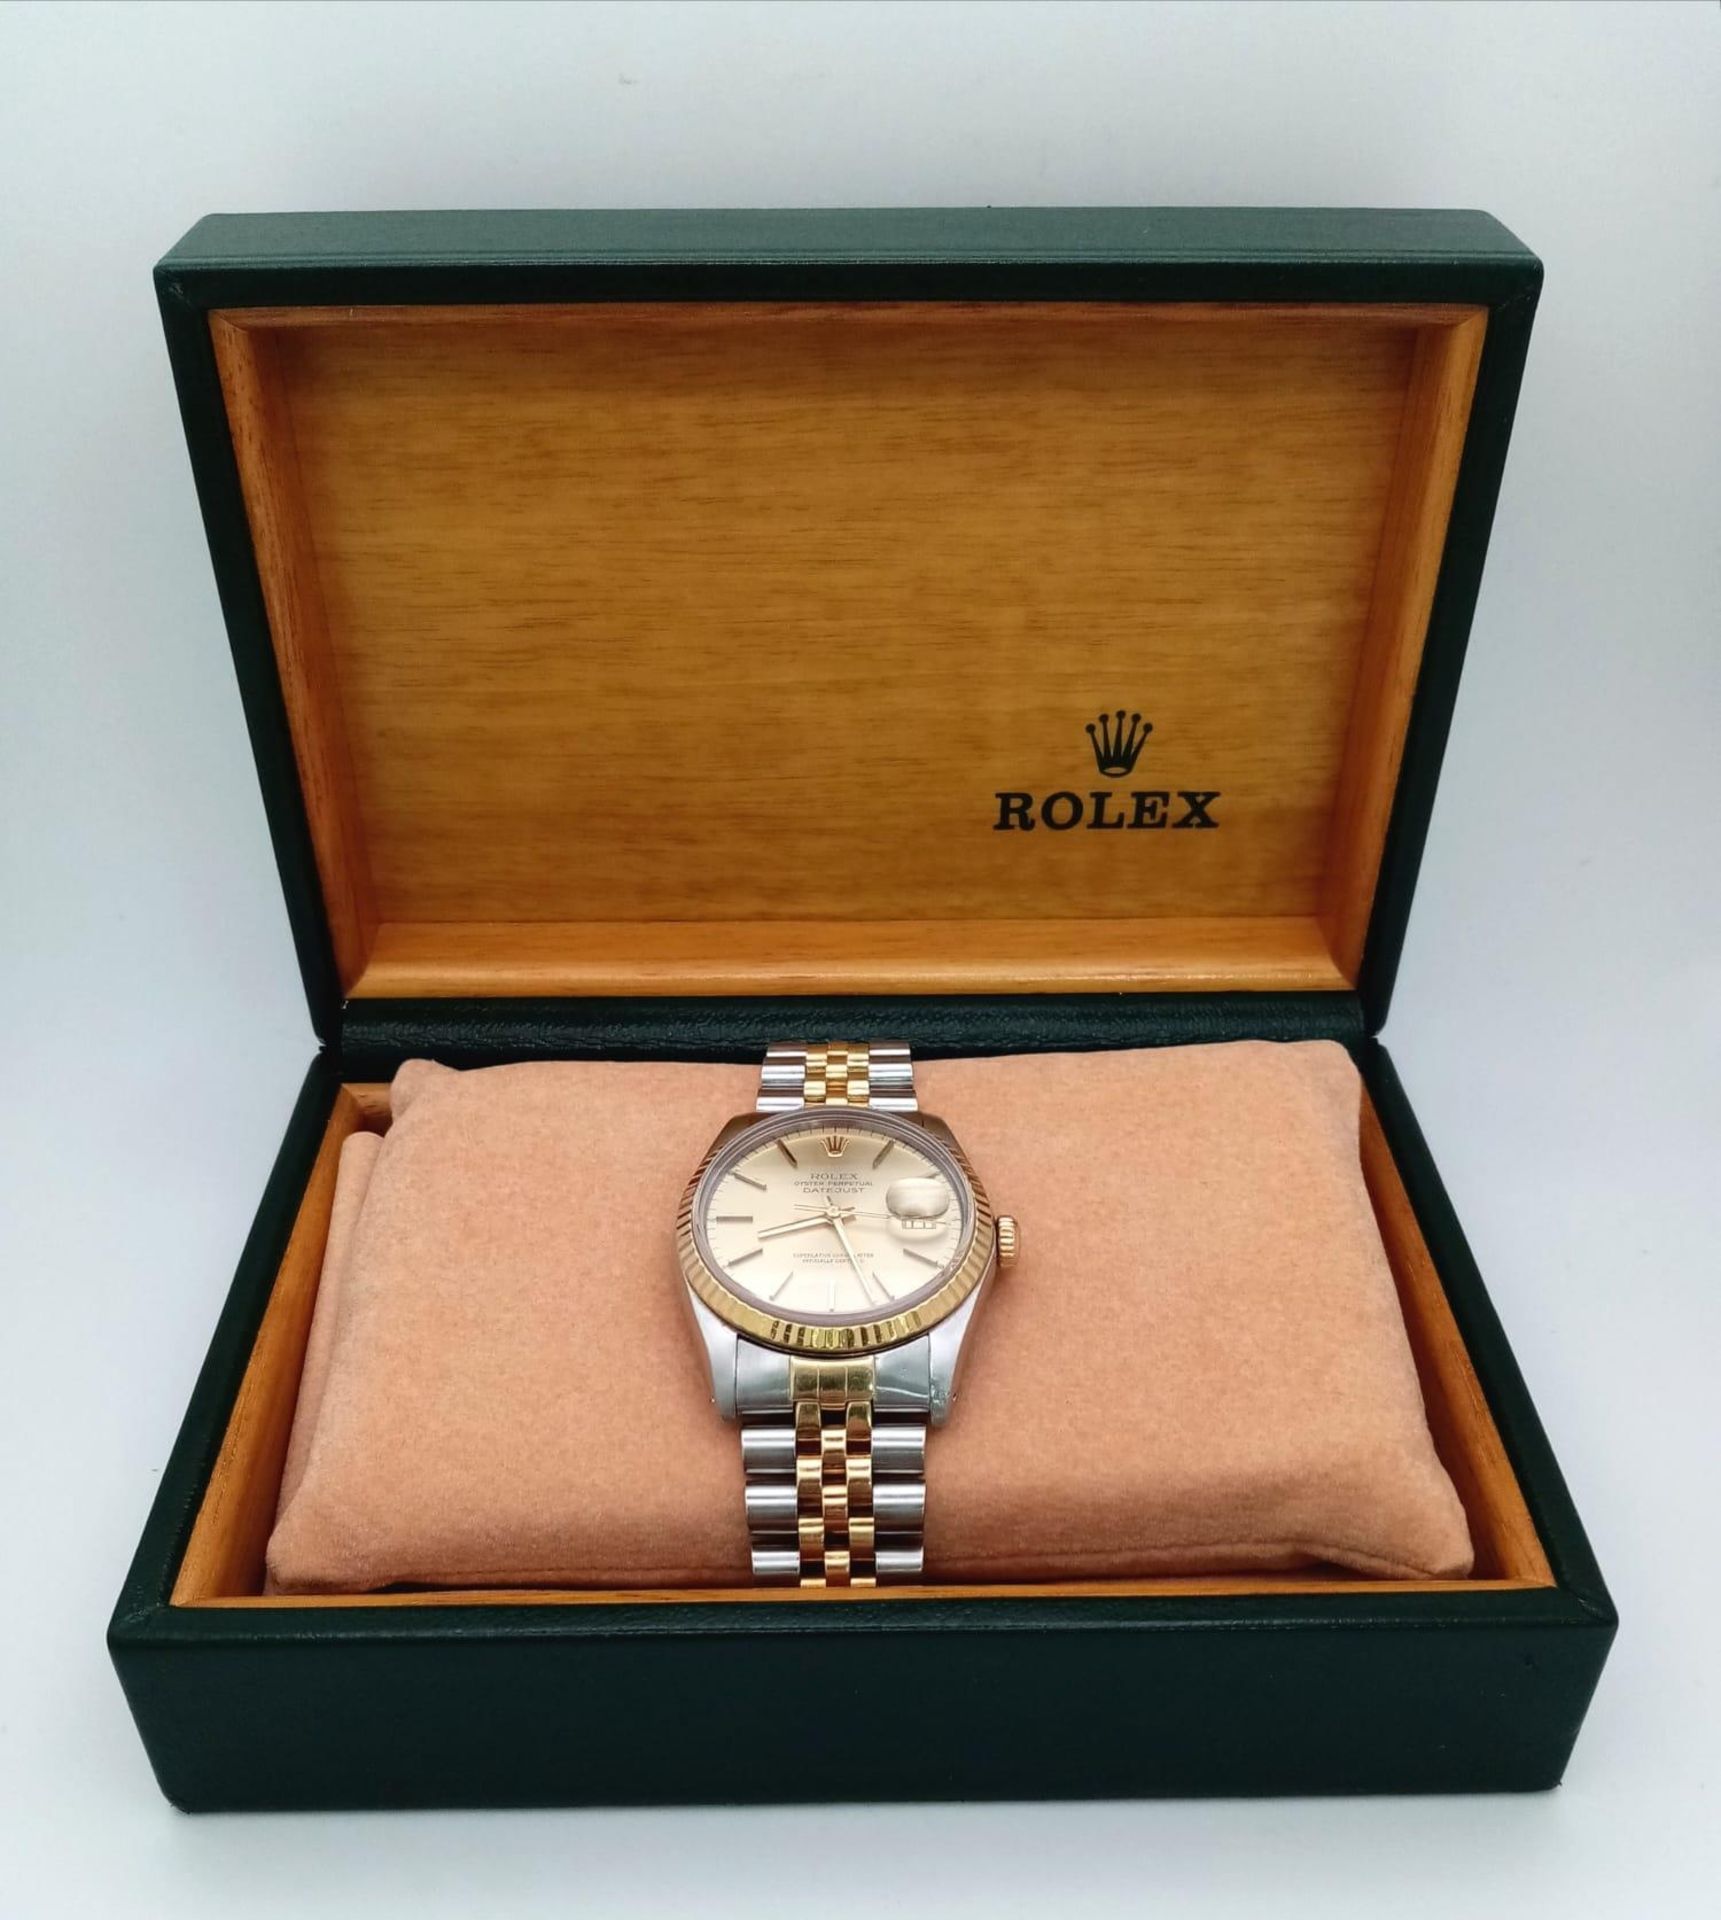 A ROLEX OYSTER PERPETUAL DATEJUST IN BI-METAL WITH GOLDTONE DIAL IN ORIGINAL BOX . 36mm - Image 9 of 10